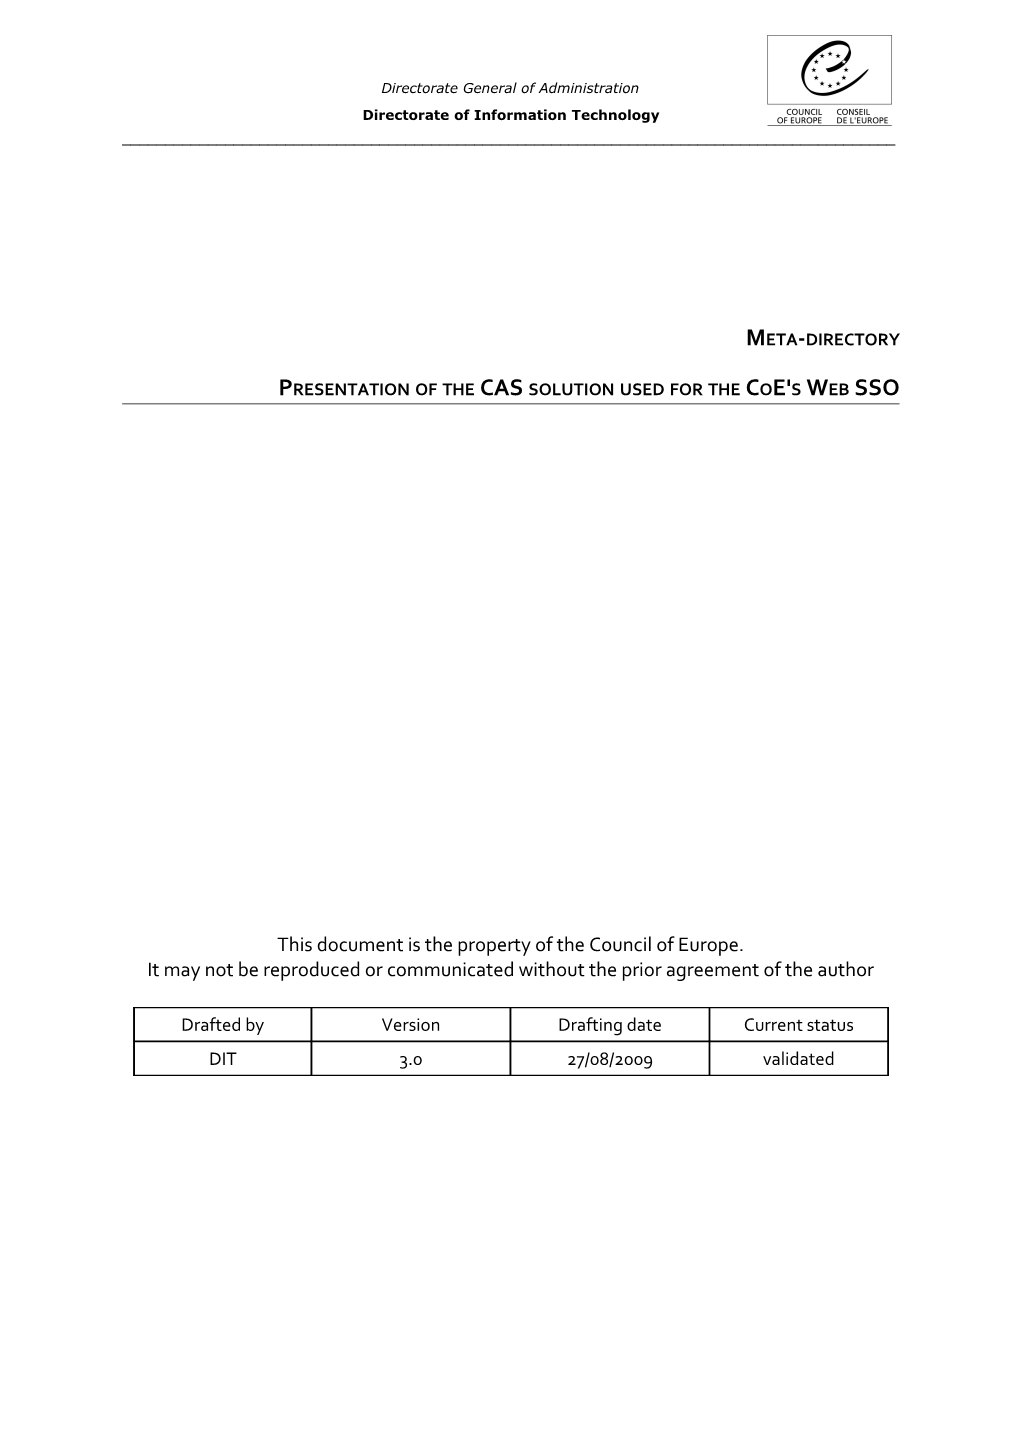 Meta-Directory - Presentation of the CAS Solution Used for the Coe's Web SSO